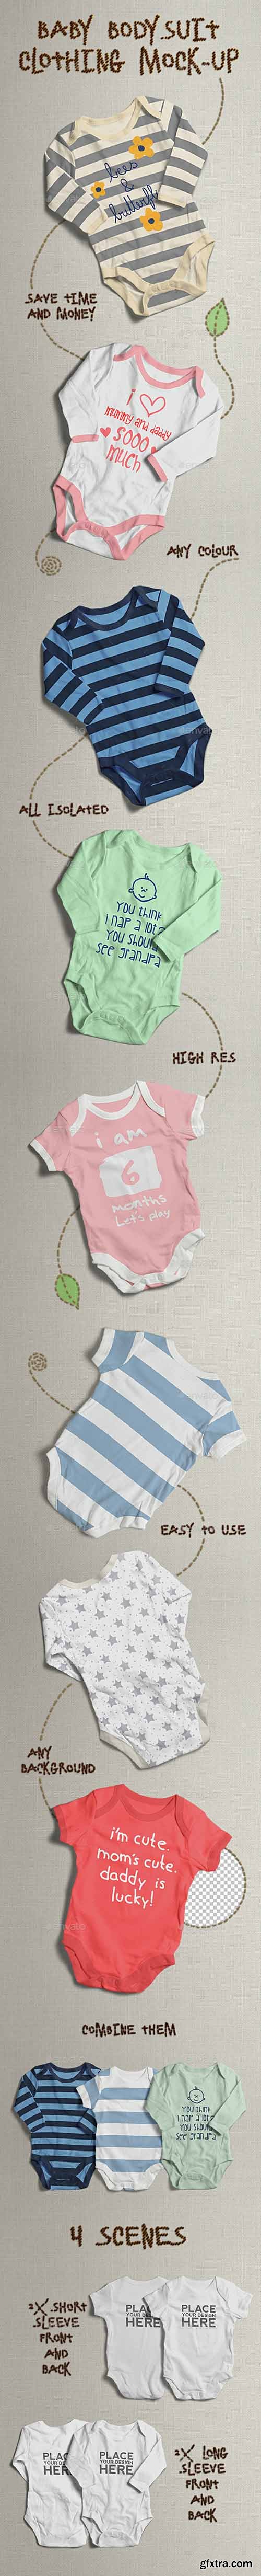 Graphicriver - Baby Bodysuit Clothing Mock-up 14656274